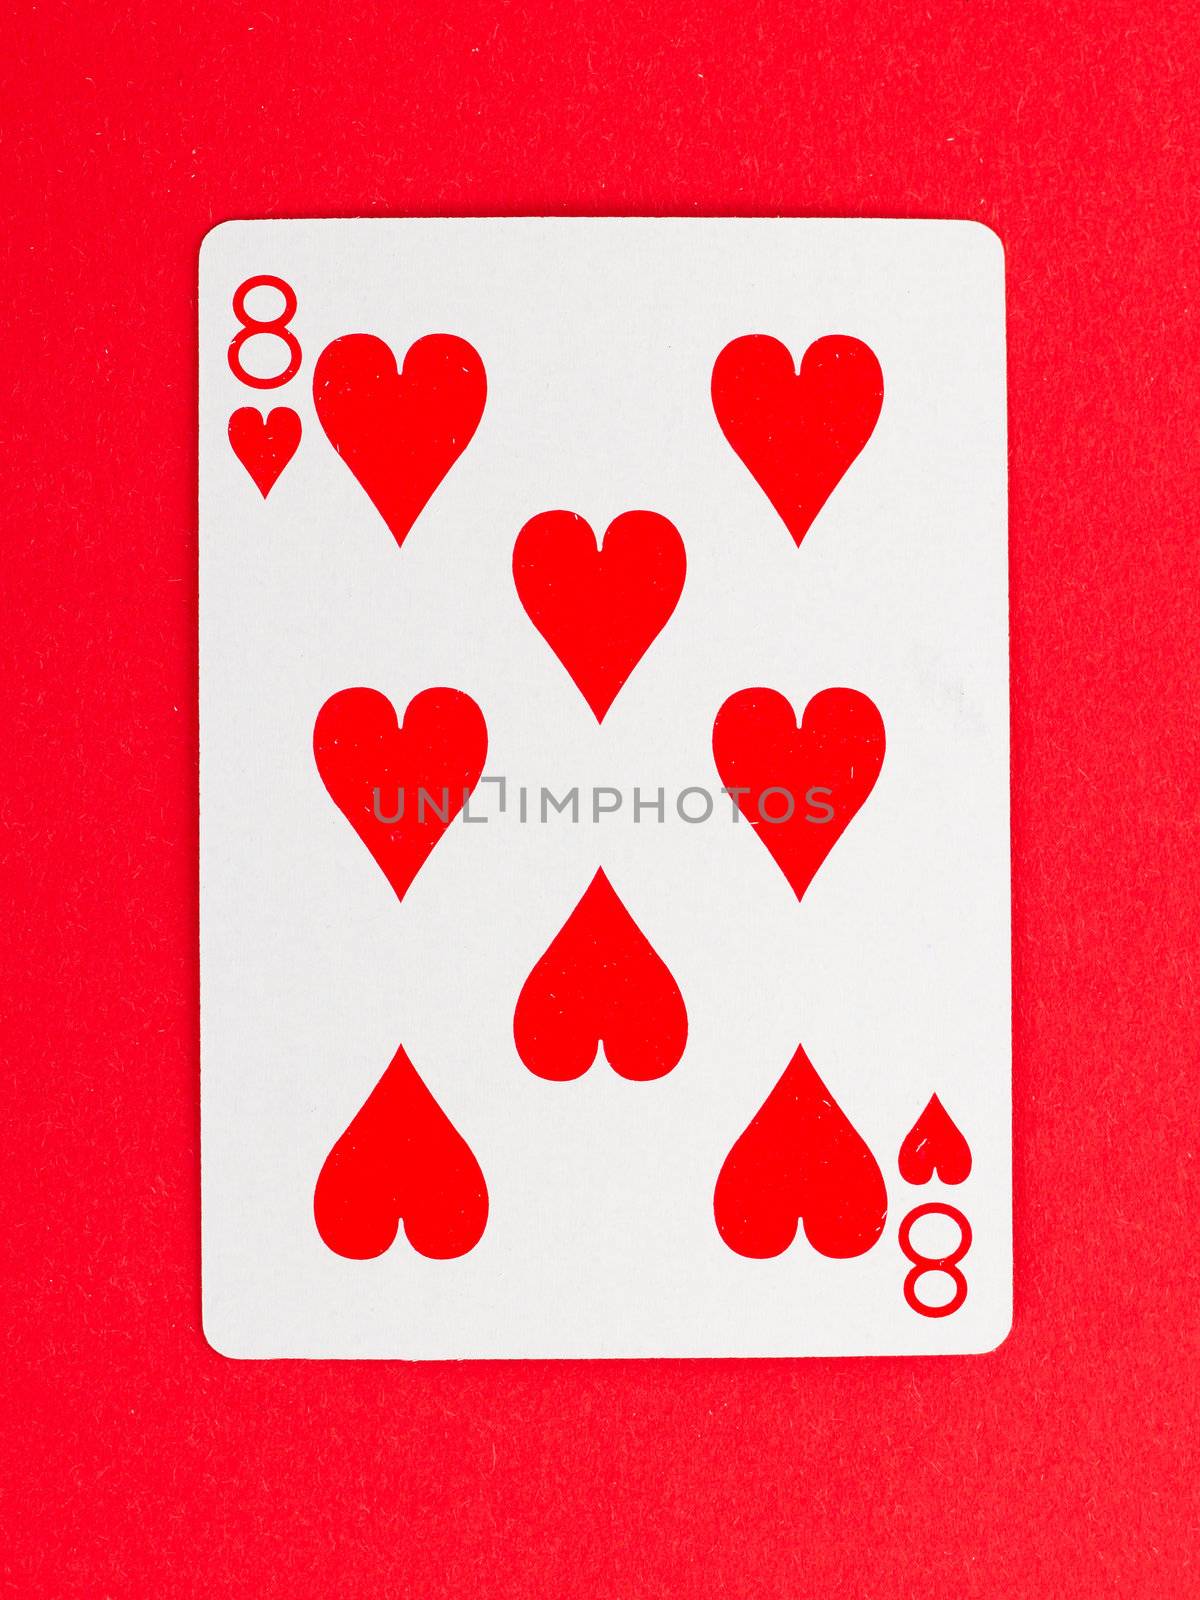 Old playing card (eight) isolated on a red background